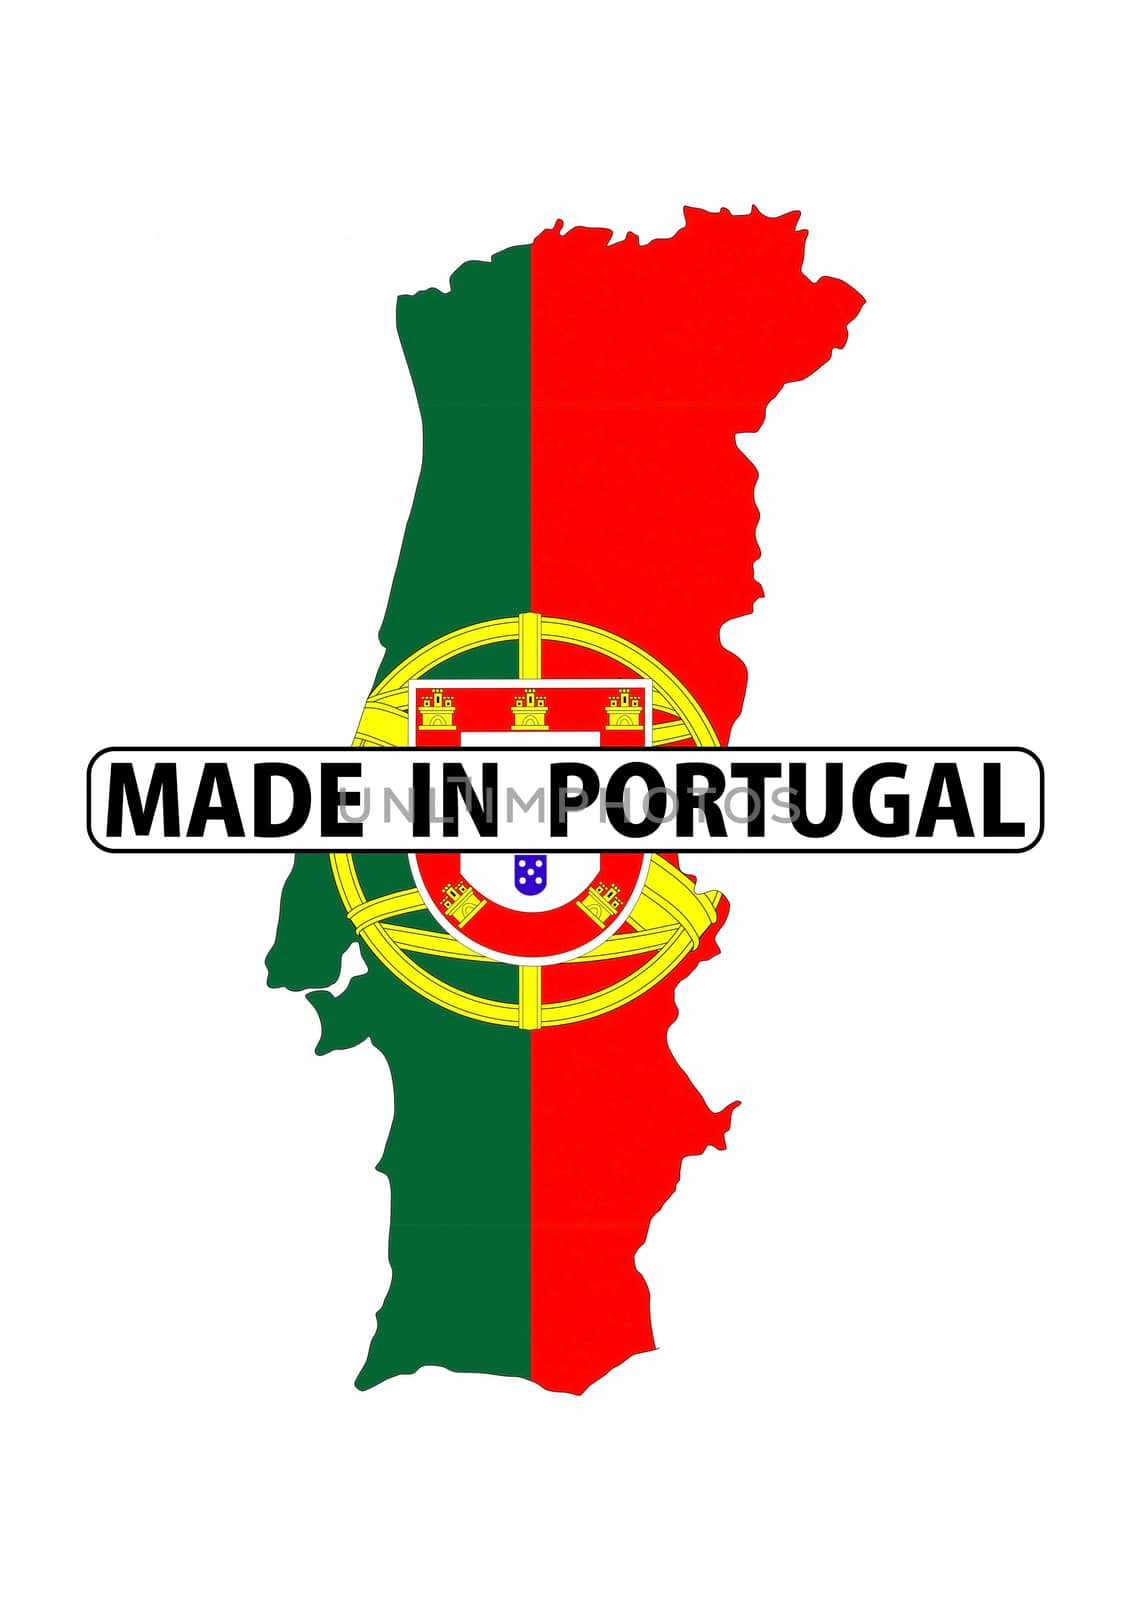 made in portugal by tony4urban